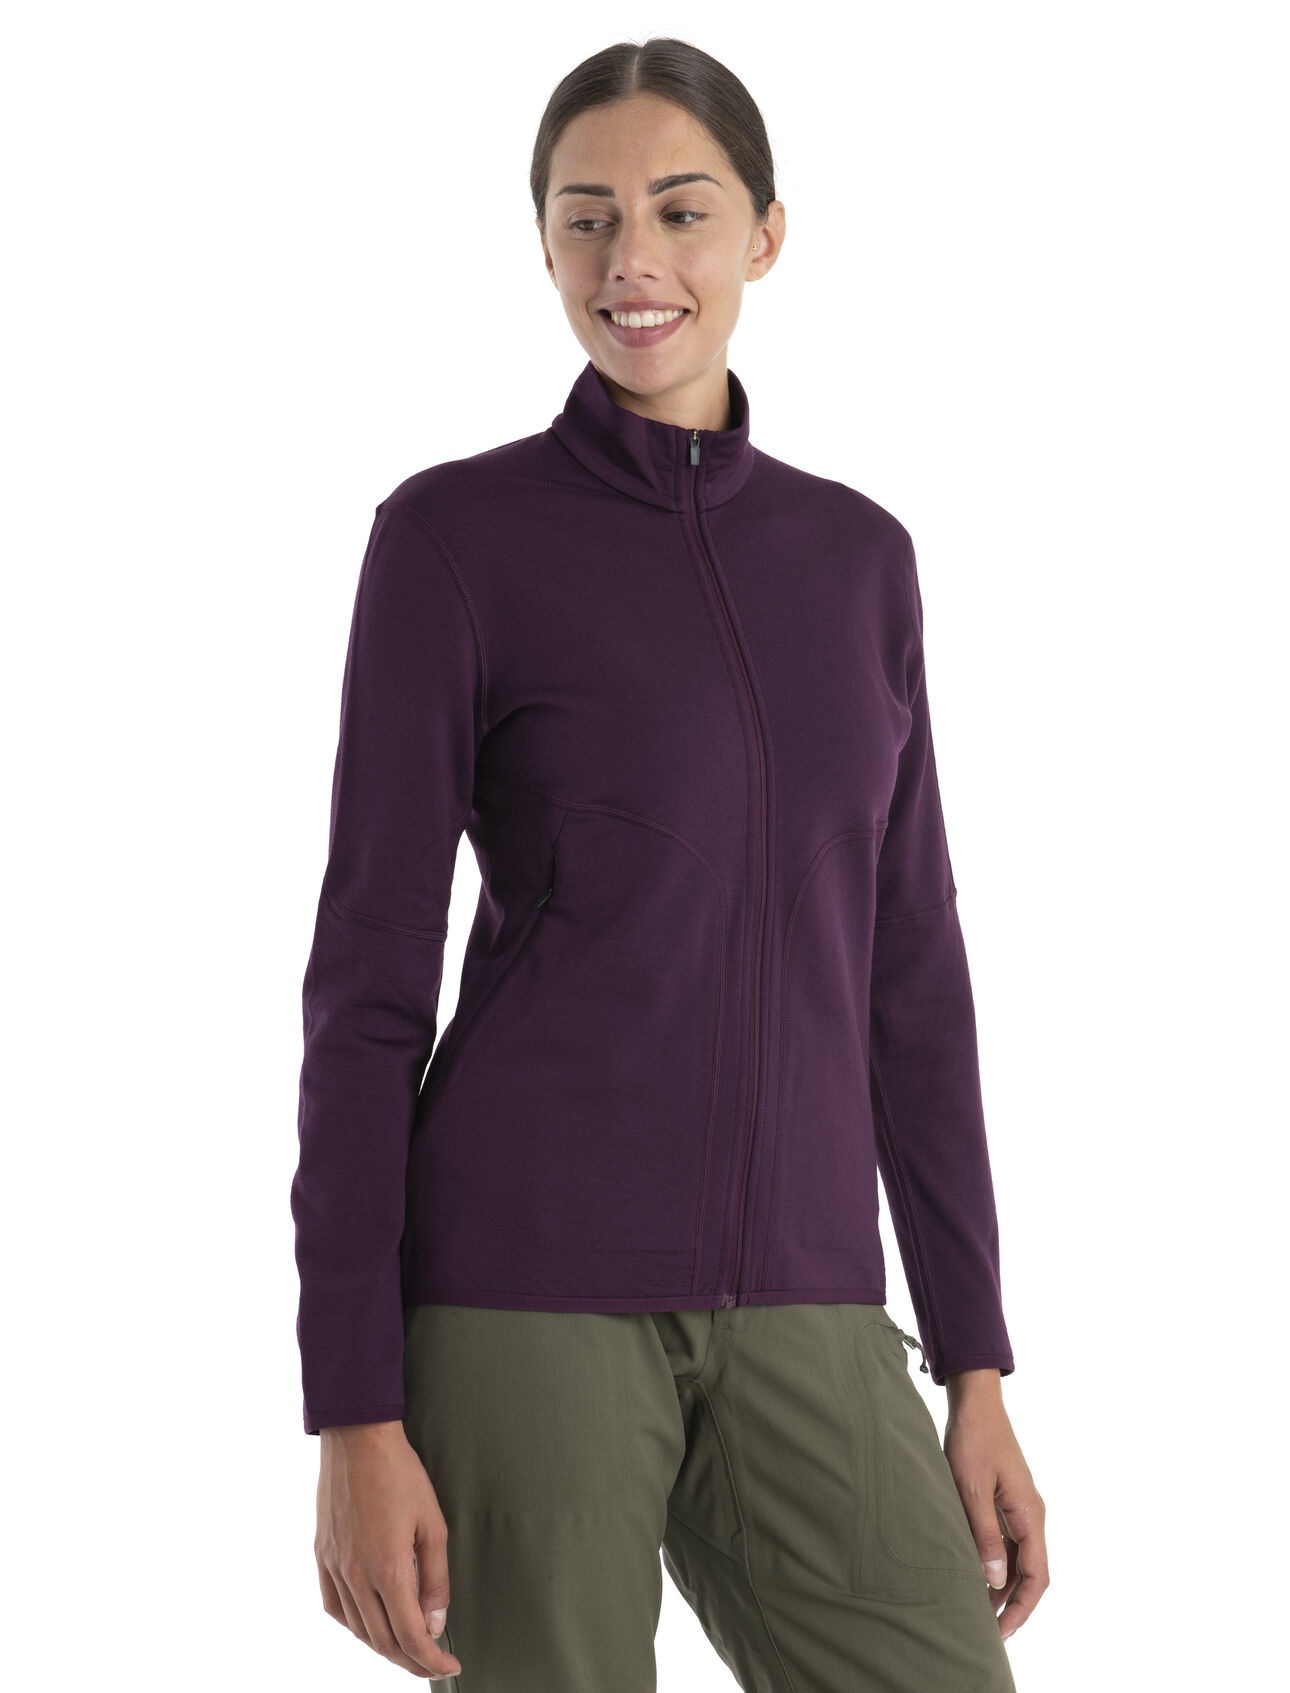 Womens Merino 560 RealFleece™ Elemental II Long Sleeve Zip Jacket A heavyweight midlayer fleece ideal for cold-weather training, skiing or alpine climbing, the 560 Realfleece™ Elemental II Long Sleeve Zip features 100% Merino wool to naturally insulate, breathe and regulate your temperature.